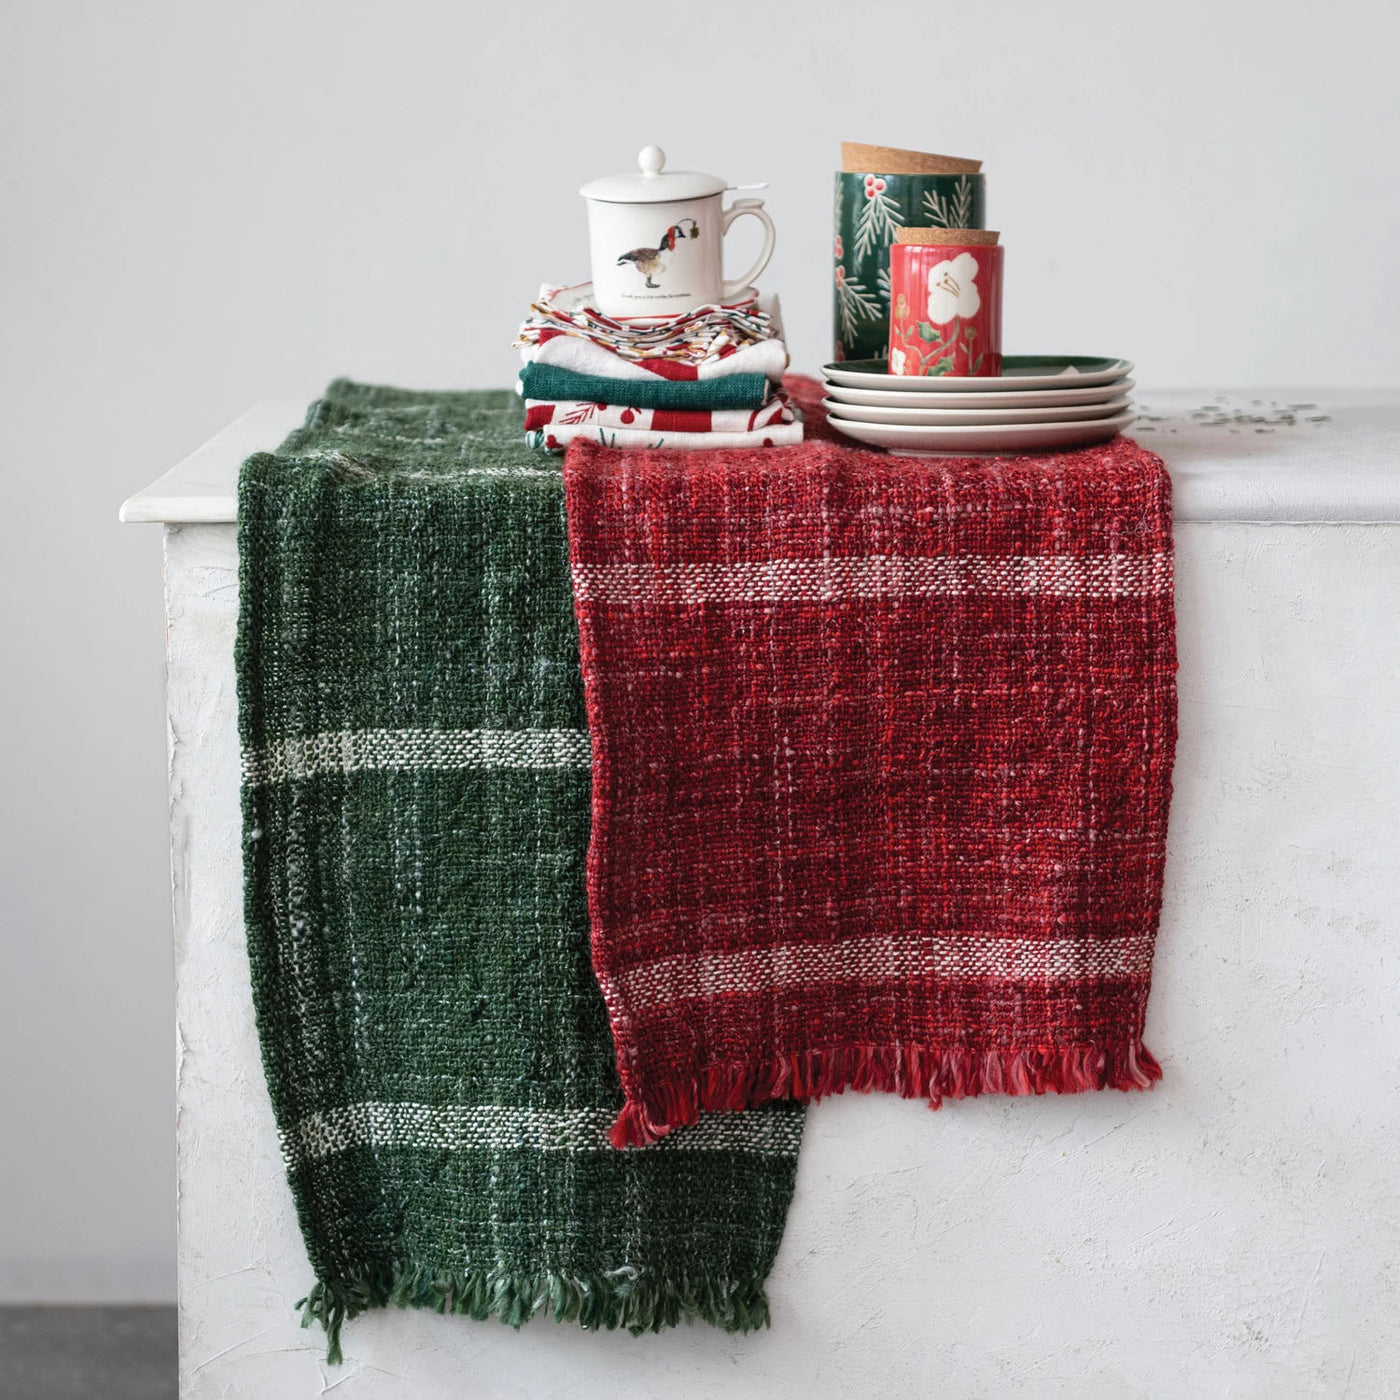 Winter Farmhouse Table Runner - Choose Cranberry or Pine